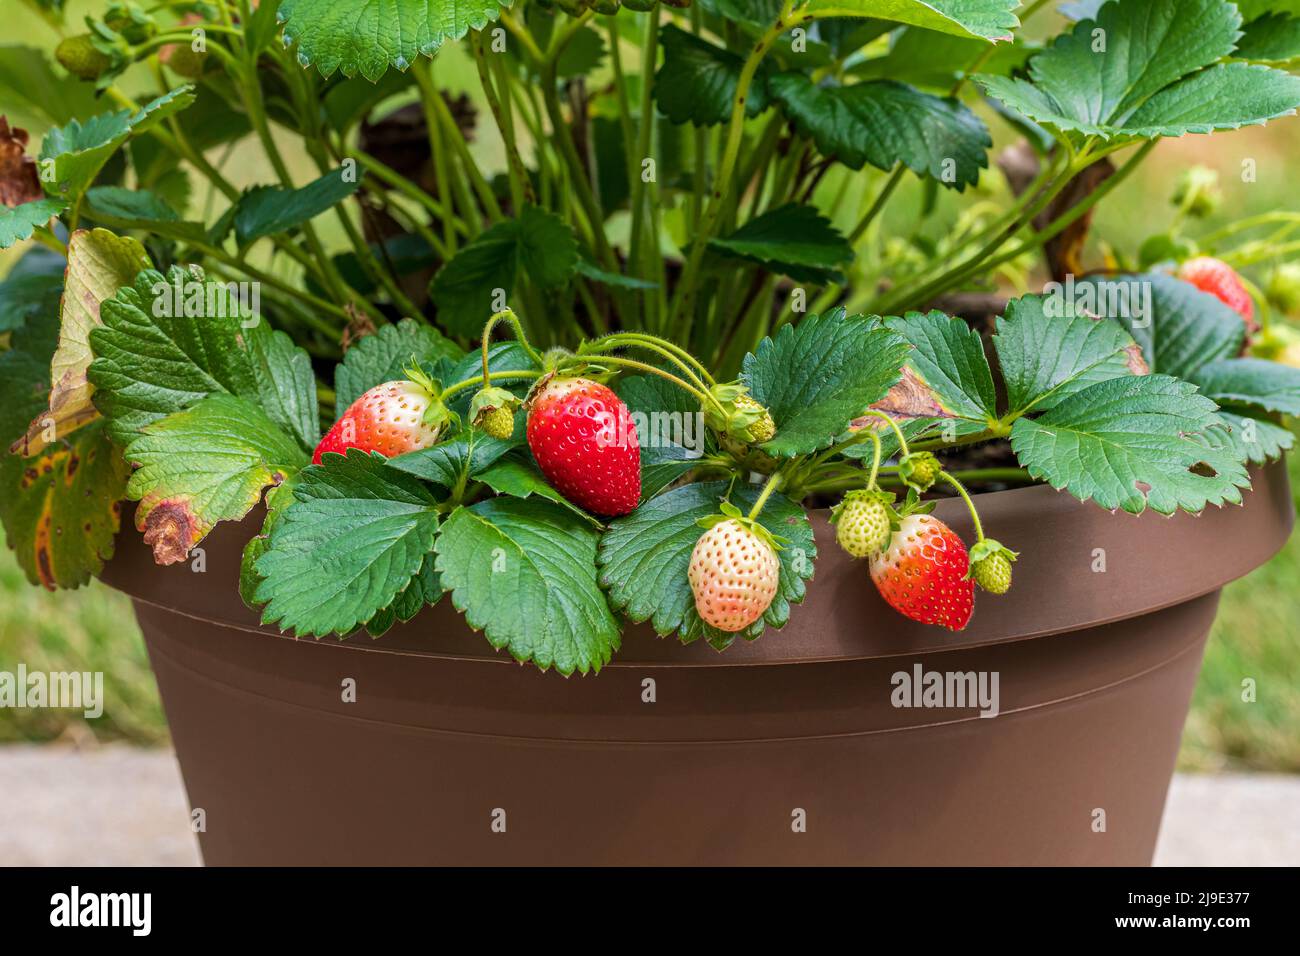 Strawberry plant with ripe fruit growing in pot. Container gardening, horticulture and organic concept Stock Photo